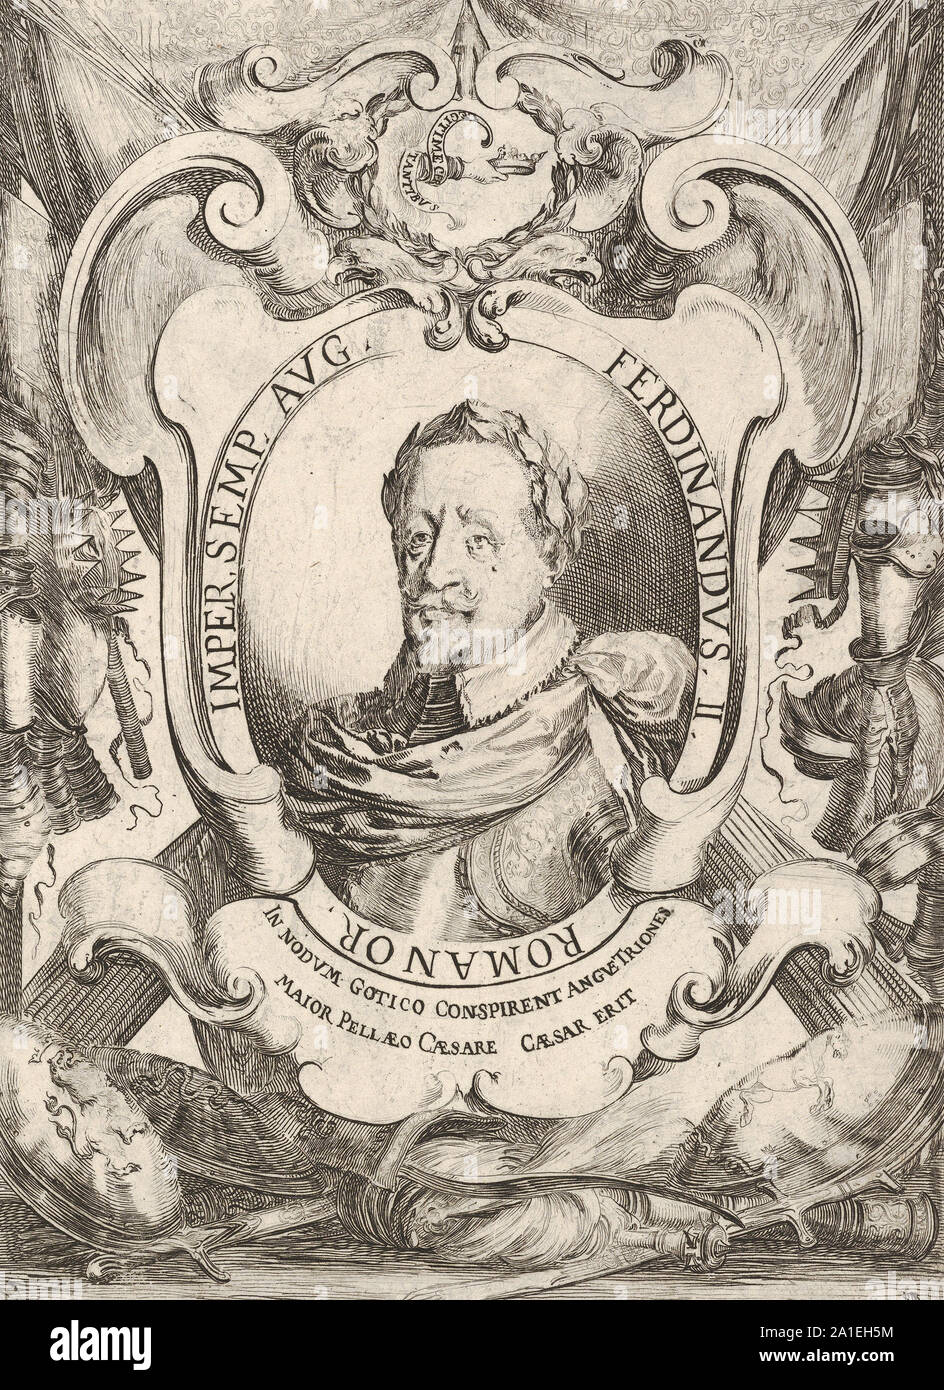 Emperor Ferdinand II. Medieval engraving. Ferdinand II (9 July 1578 – 15 February 1637), a member of the House of Habsburg, was Holy Roman Emperor (1619–1637), King of Bohemia (1617–1619, 1620–1637), and King of Hungary (1618–1637). He was the son of Archduke Charles II of Inner Austria, and Maria of Bavaria. Stock Photo